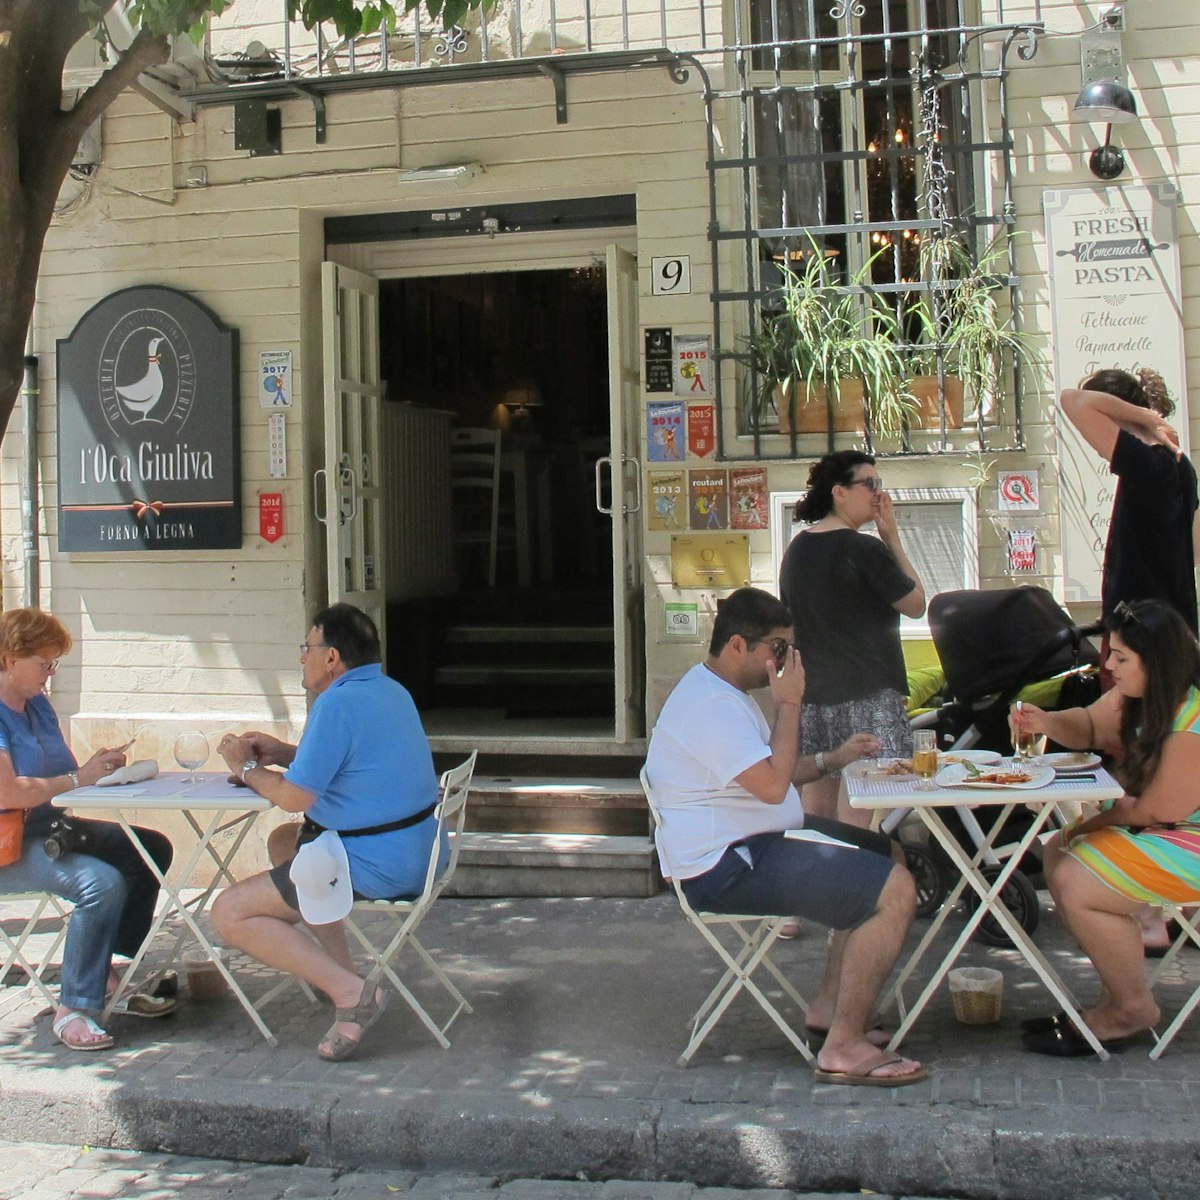 L’Oca Giuliva restaurant people sitting at tables on pavement.